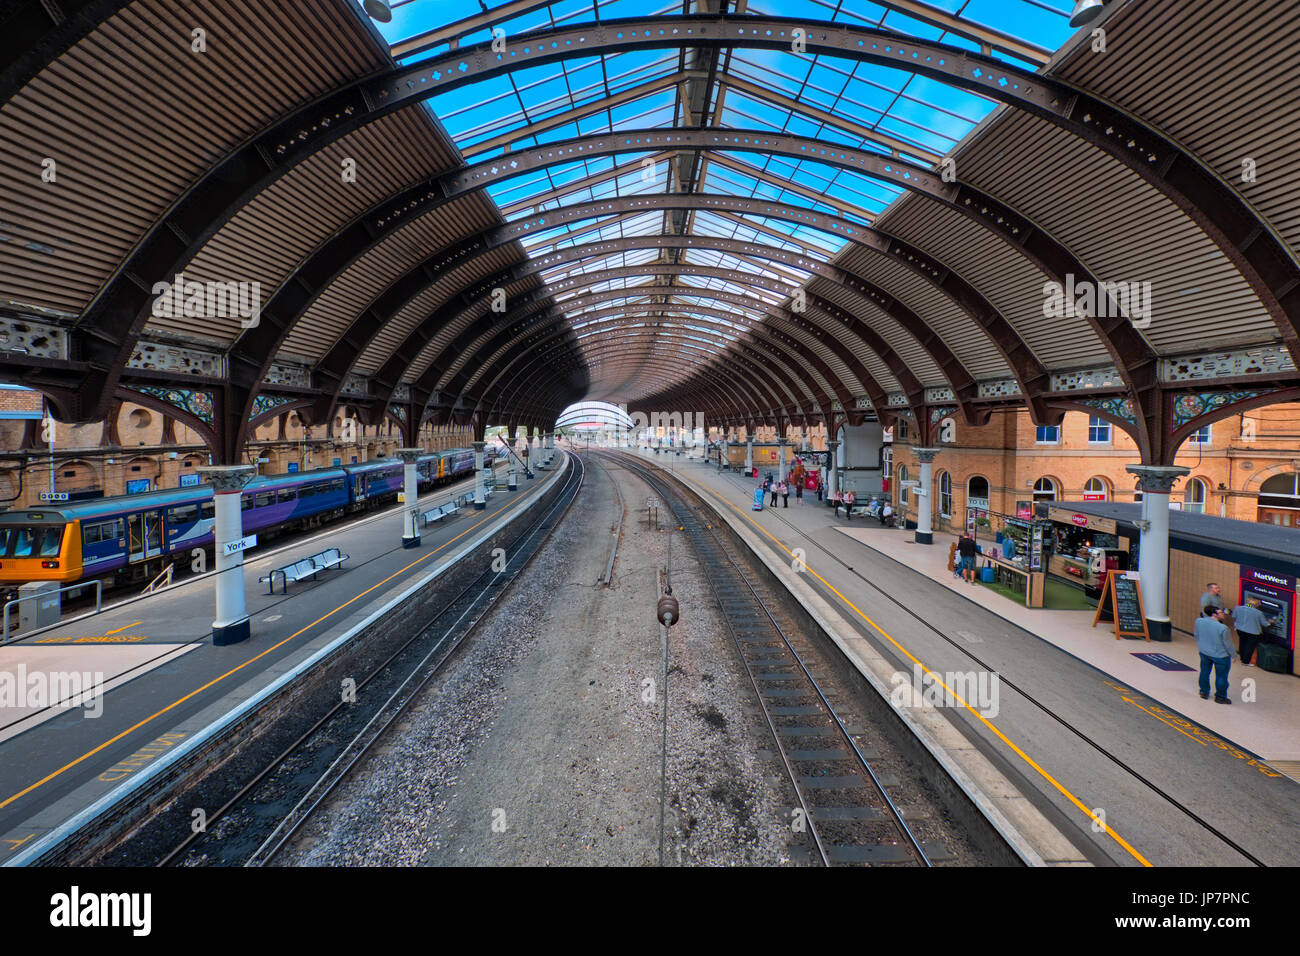 The famous, historical York Station in the northern English city of York. Stock Photo